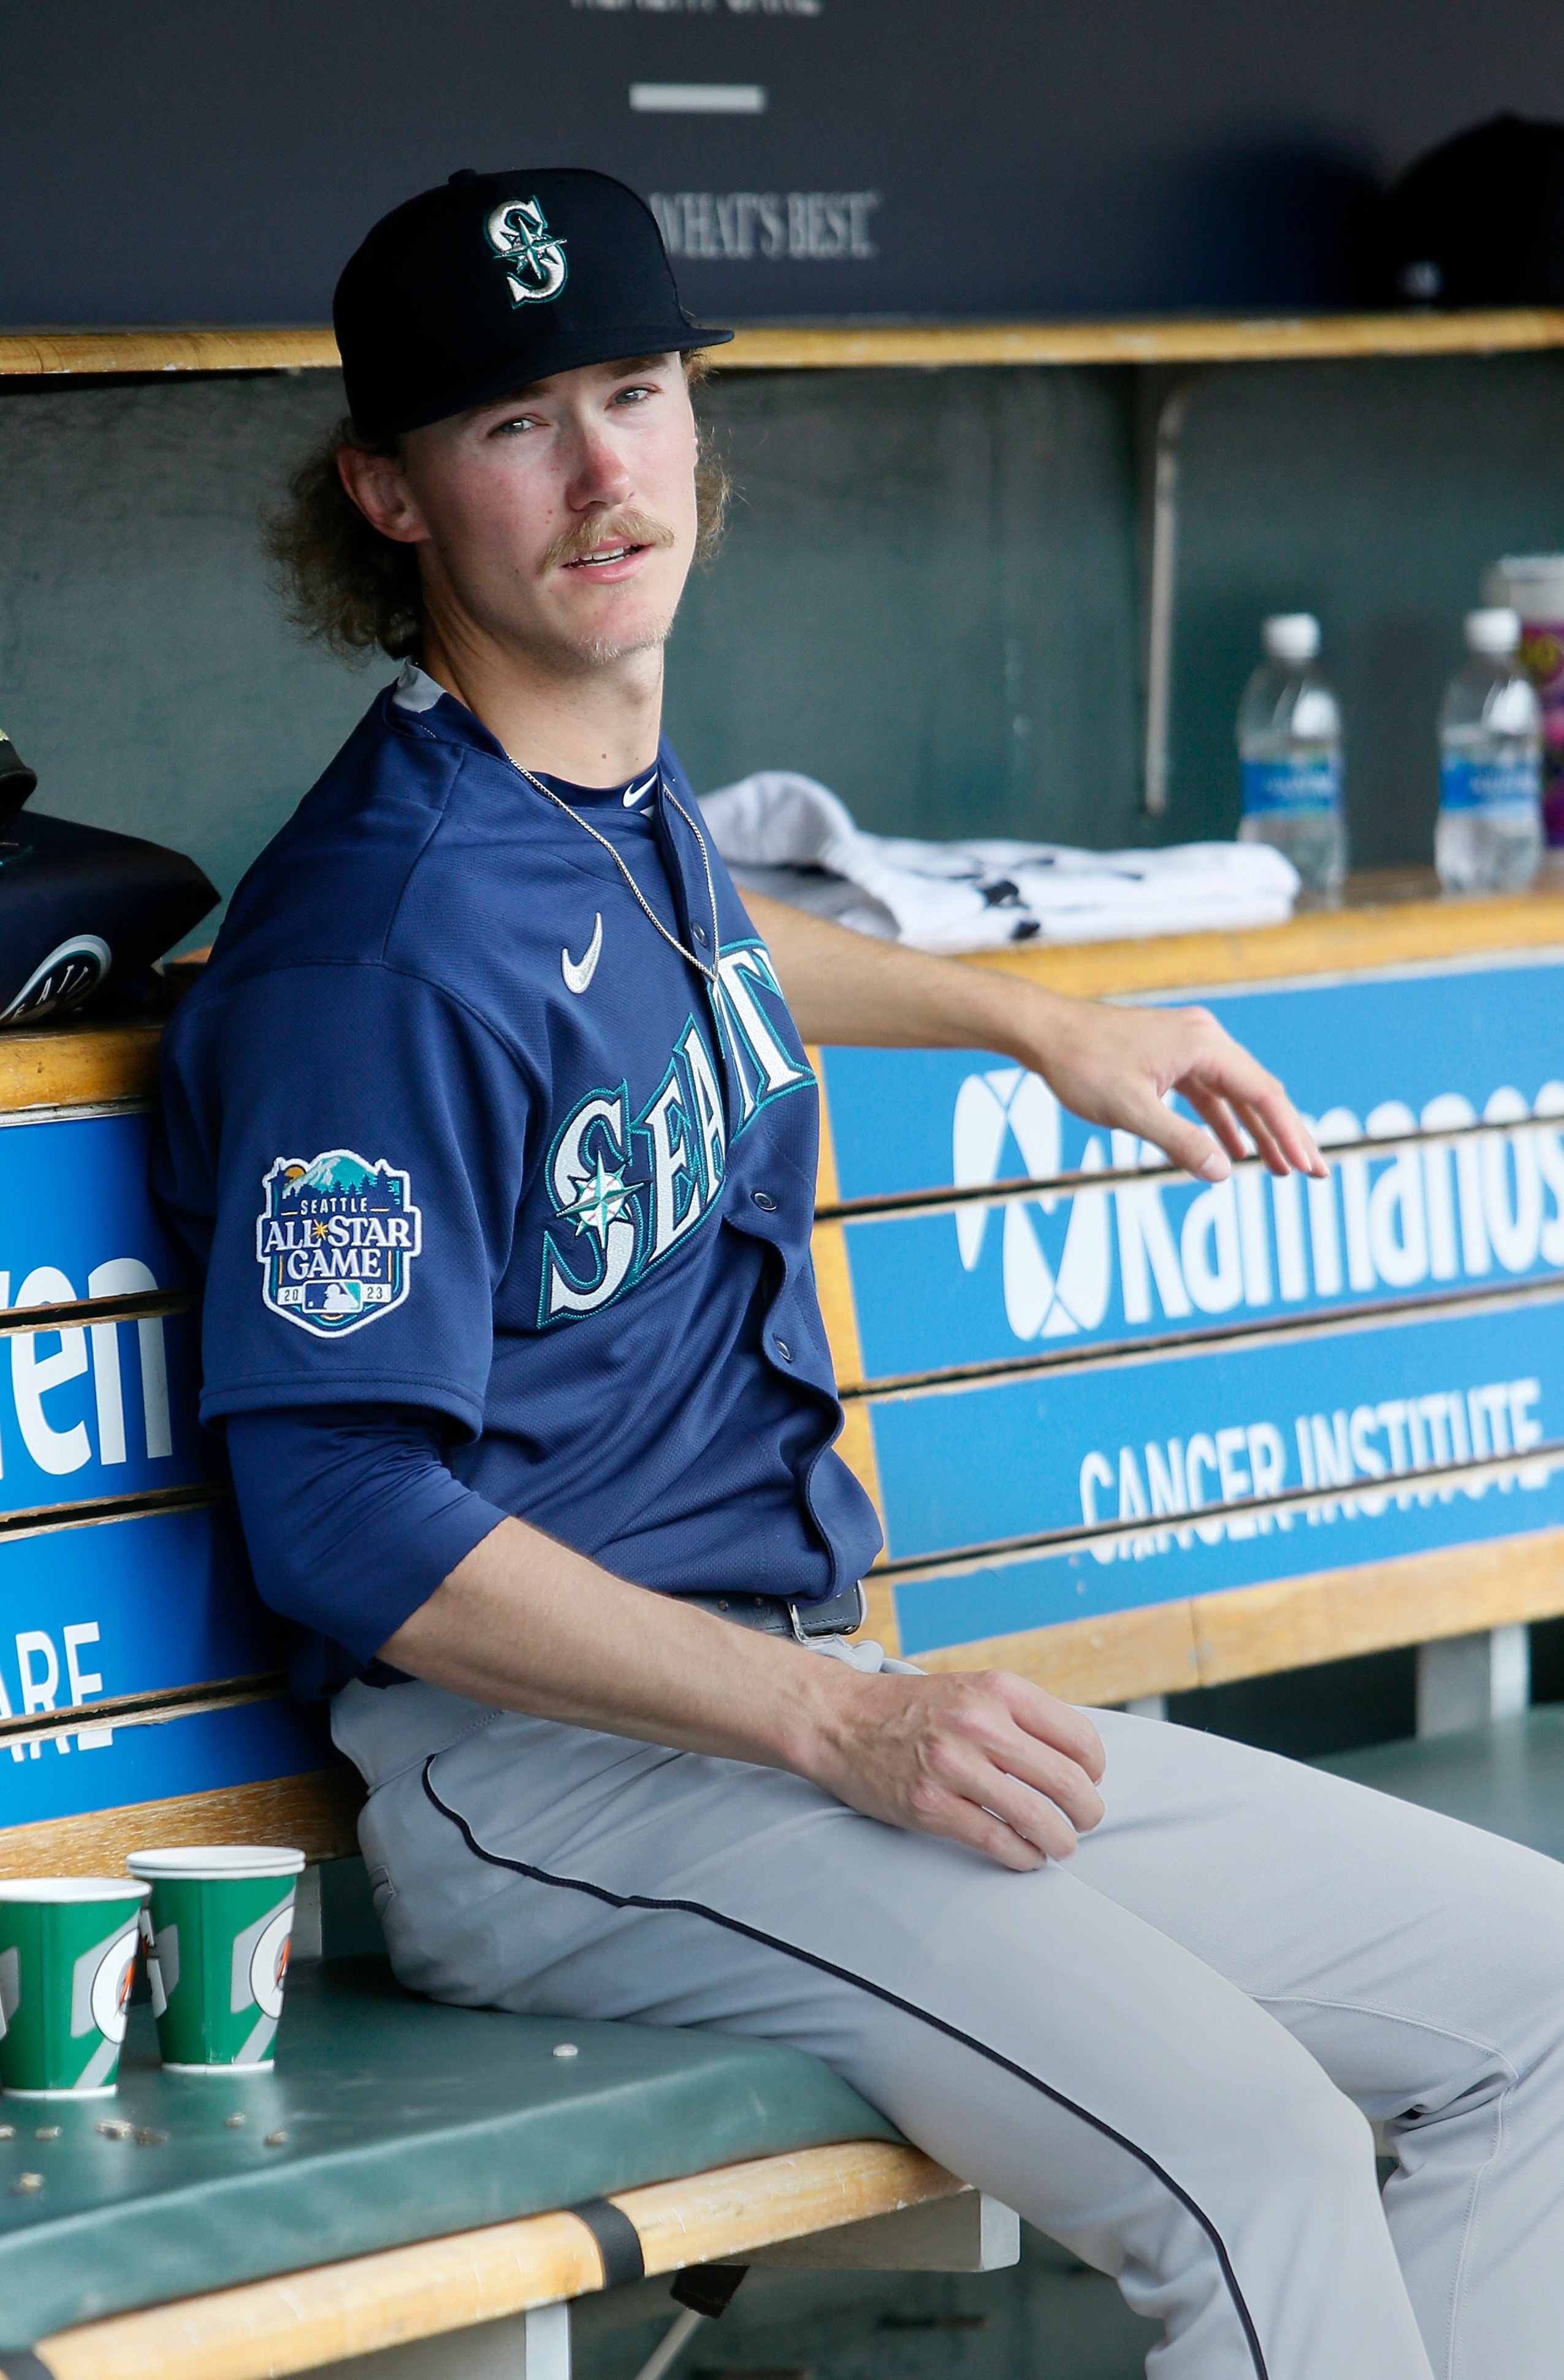 How Bryce Miller Became Latest Sensation in Mariners' Pitching-Rich  Pipeline